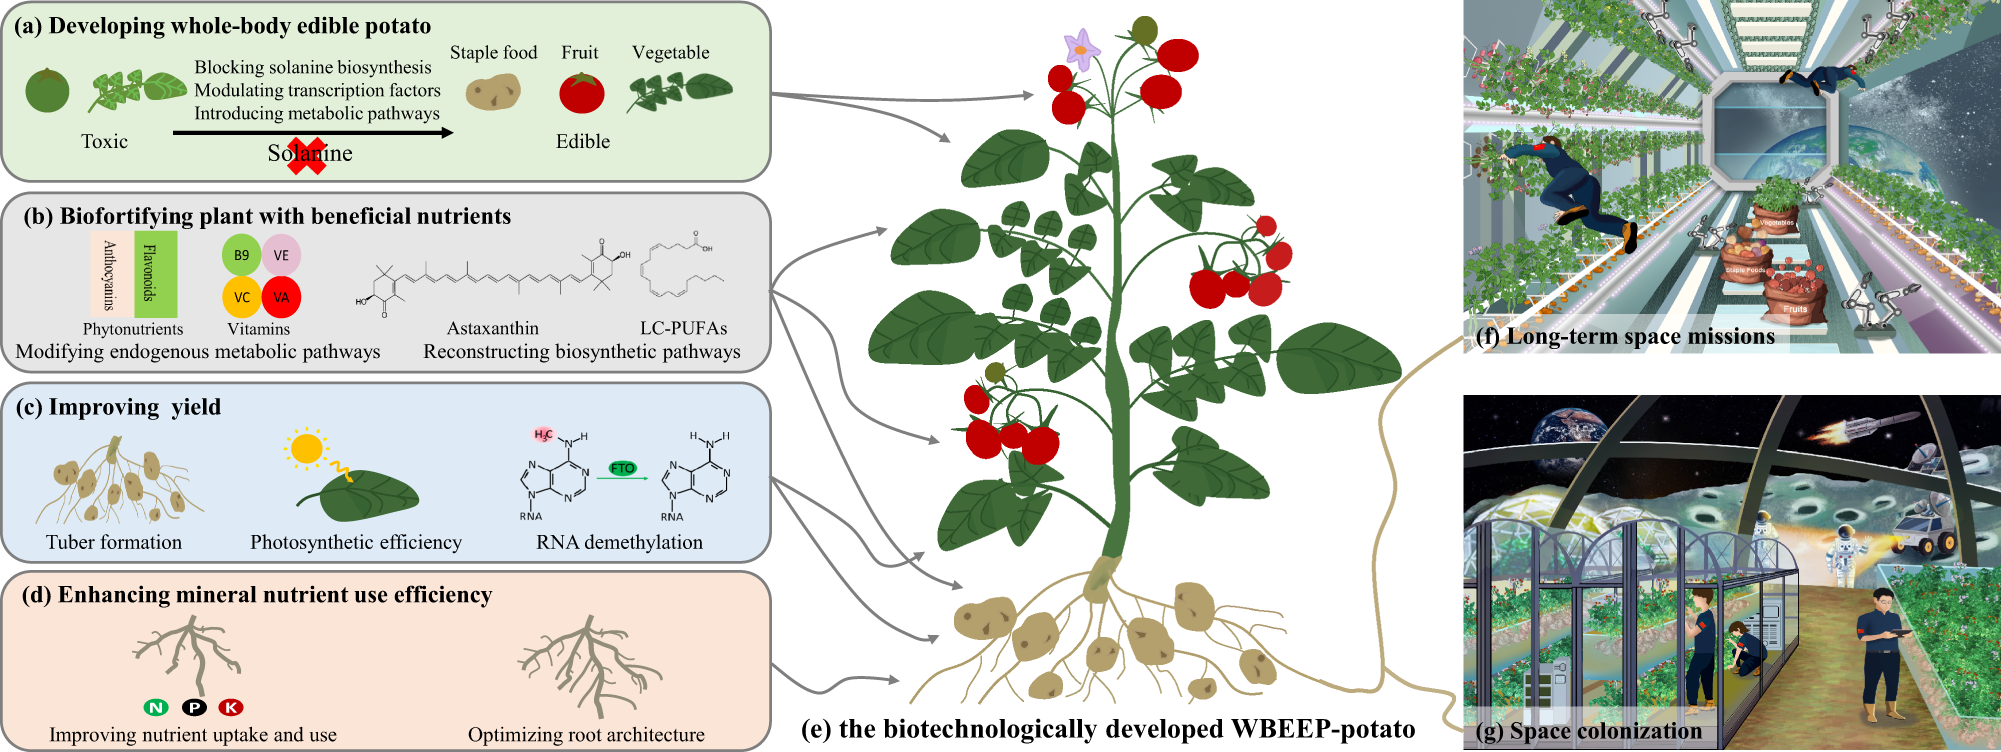 Biotechnological development of plants for space agriculture